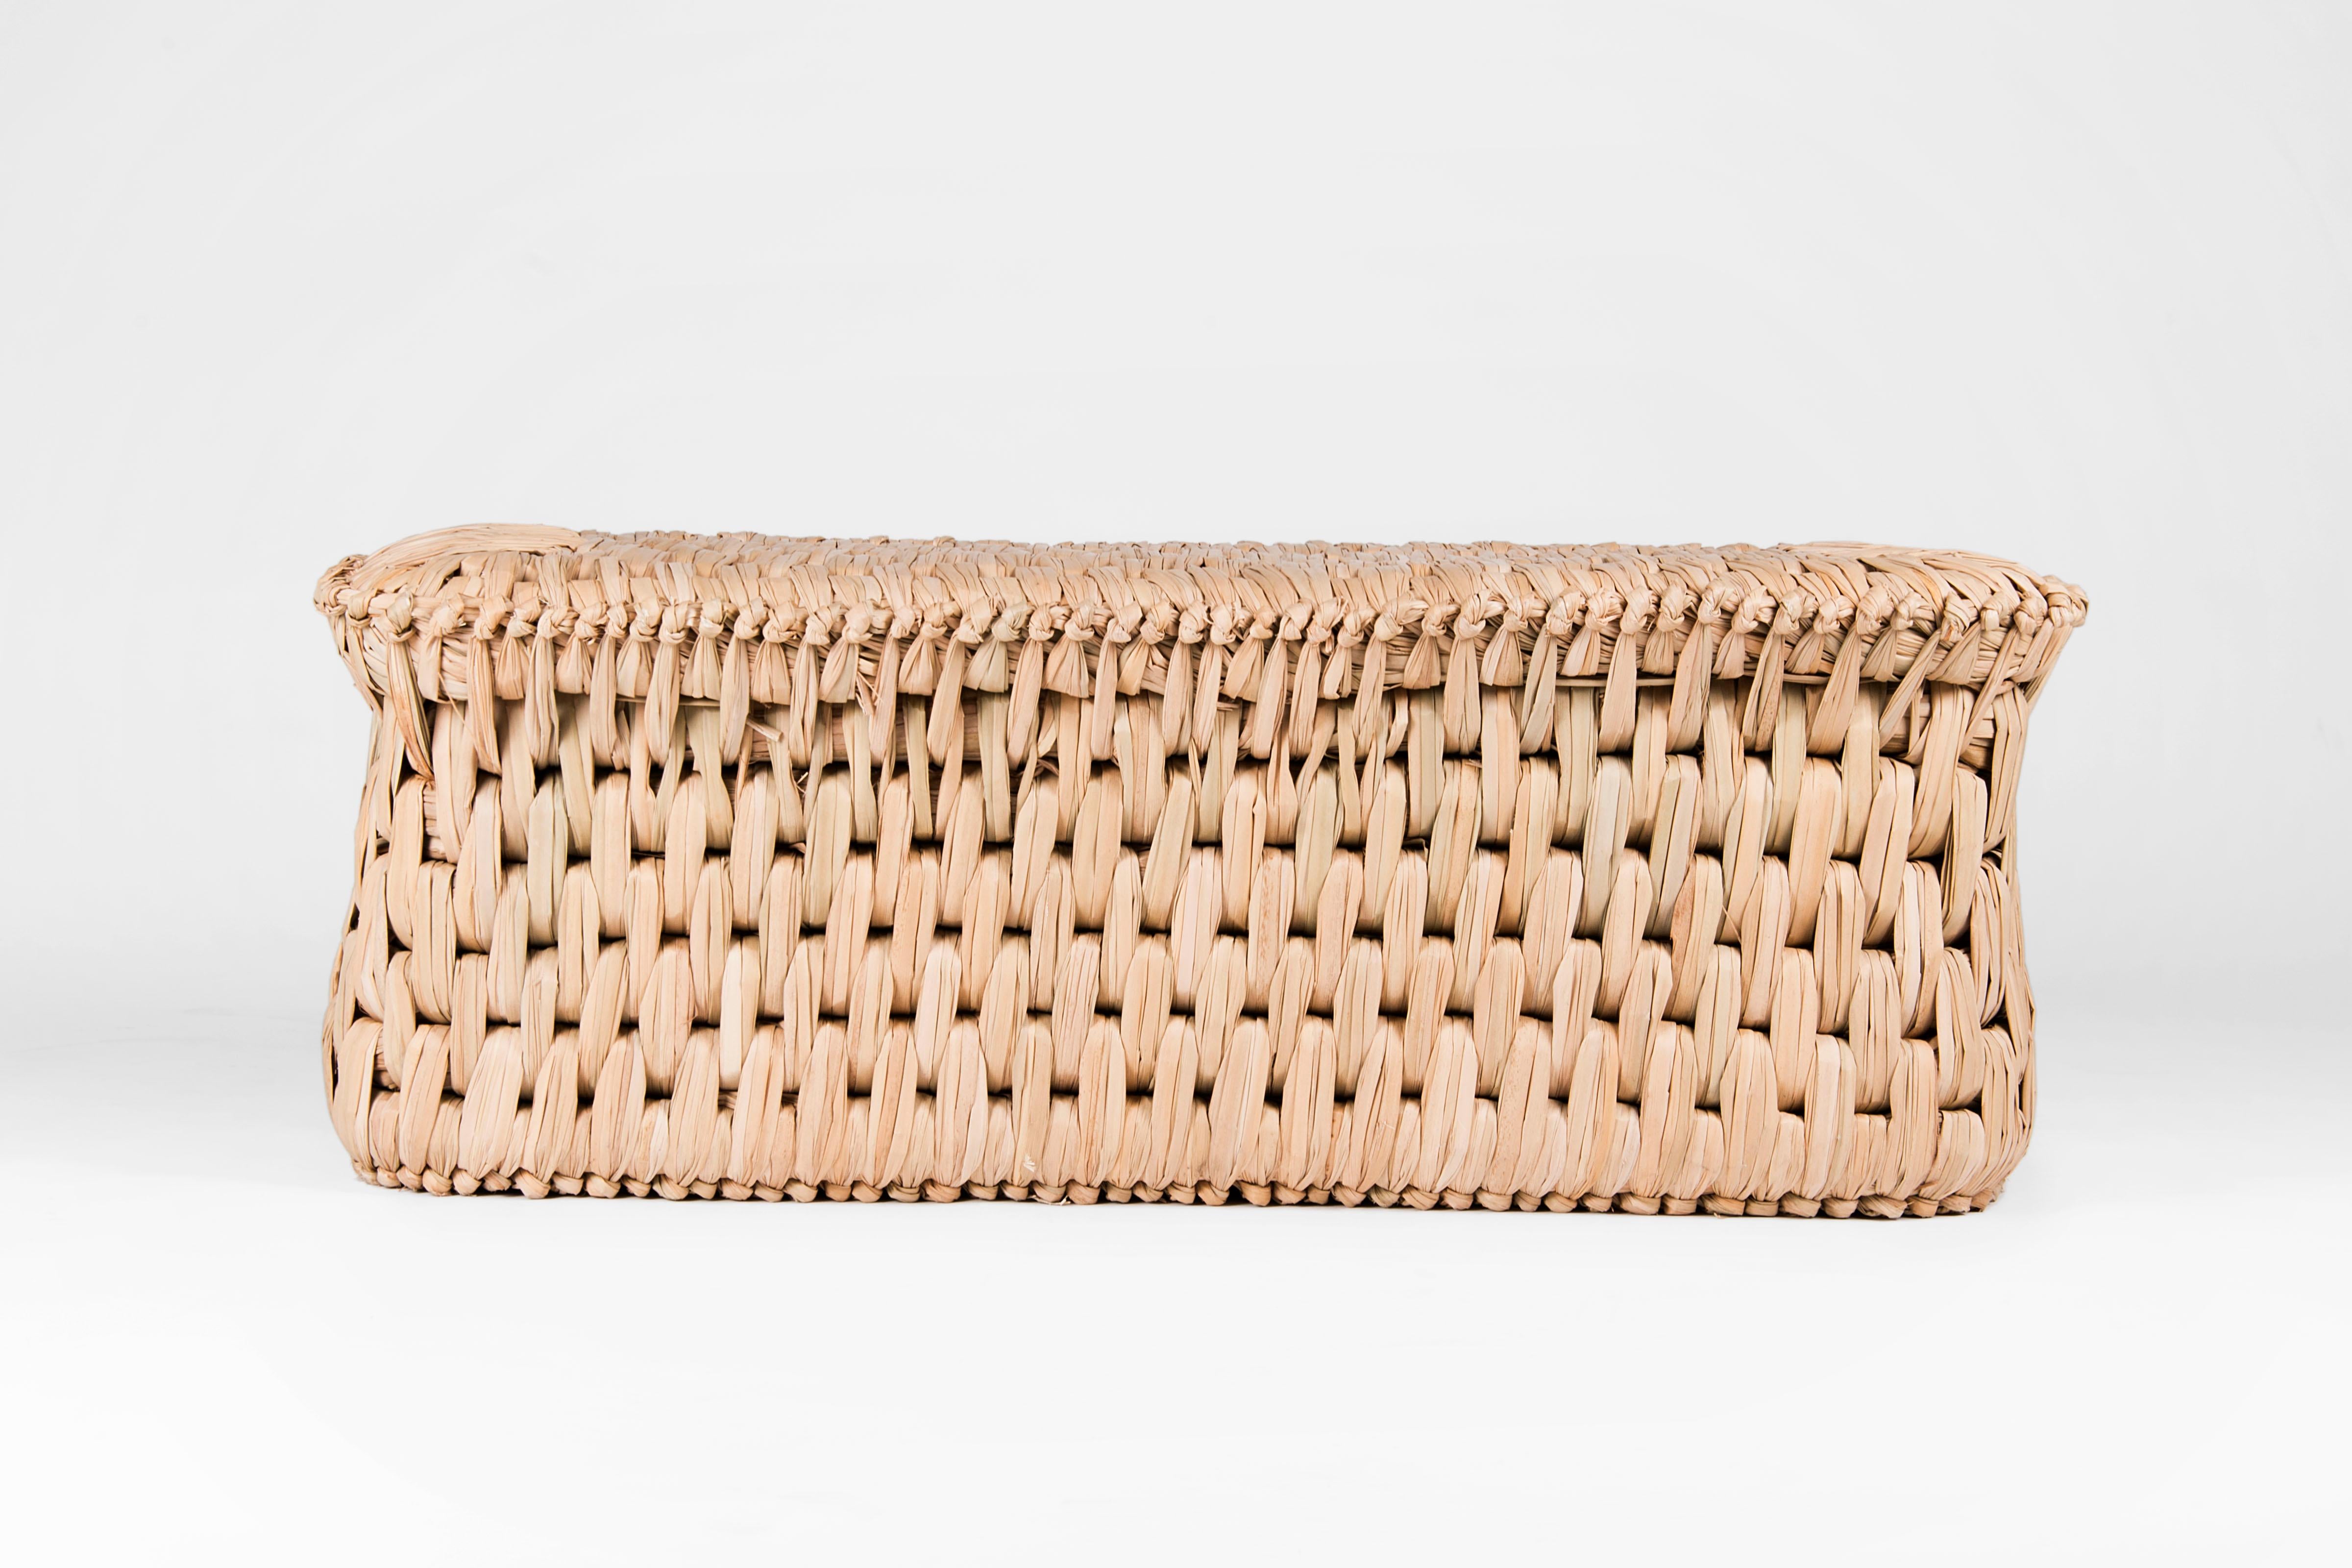 Woven Tule 'Icpalli' Bench made in Mexico from LUTECA For Sale at ...